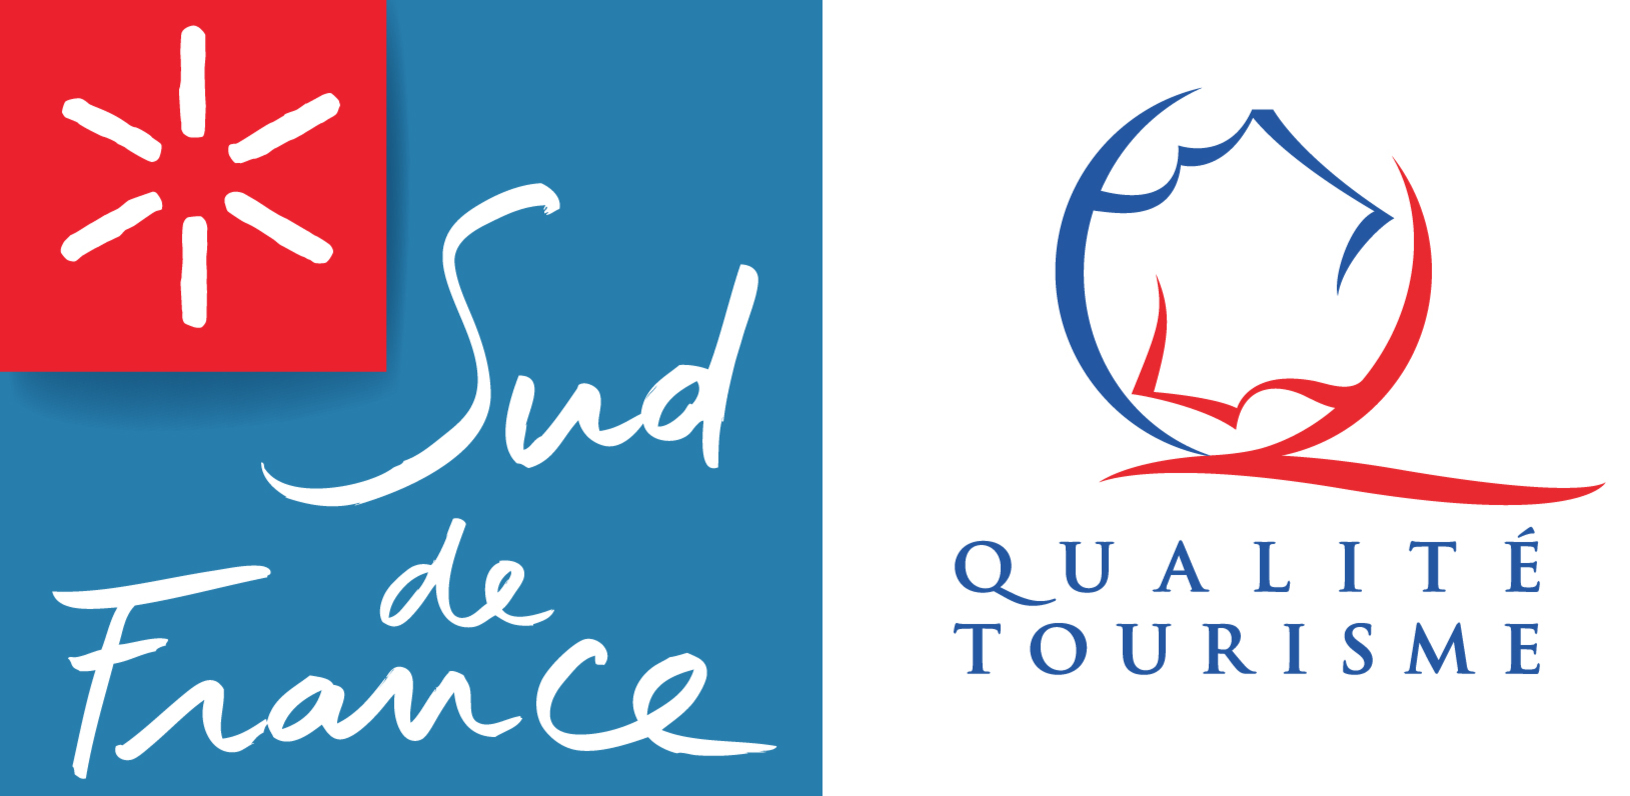 Official classification from Qualité Tourisme with 97% score